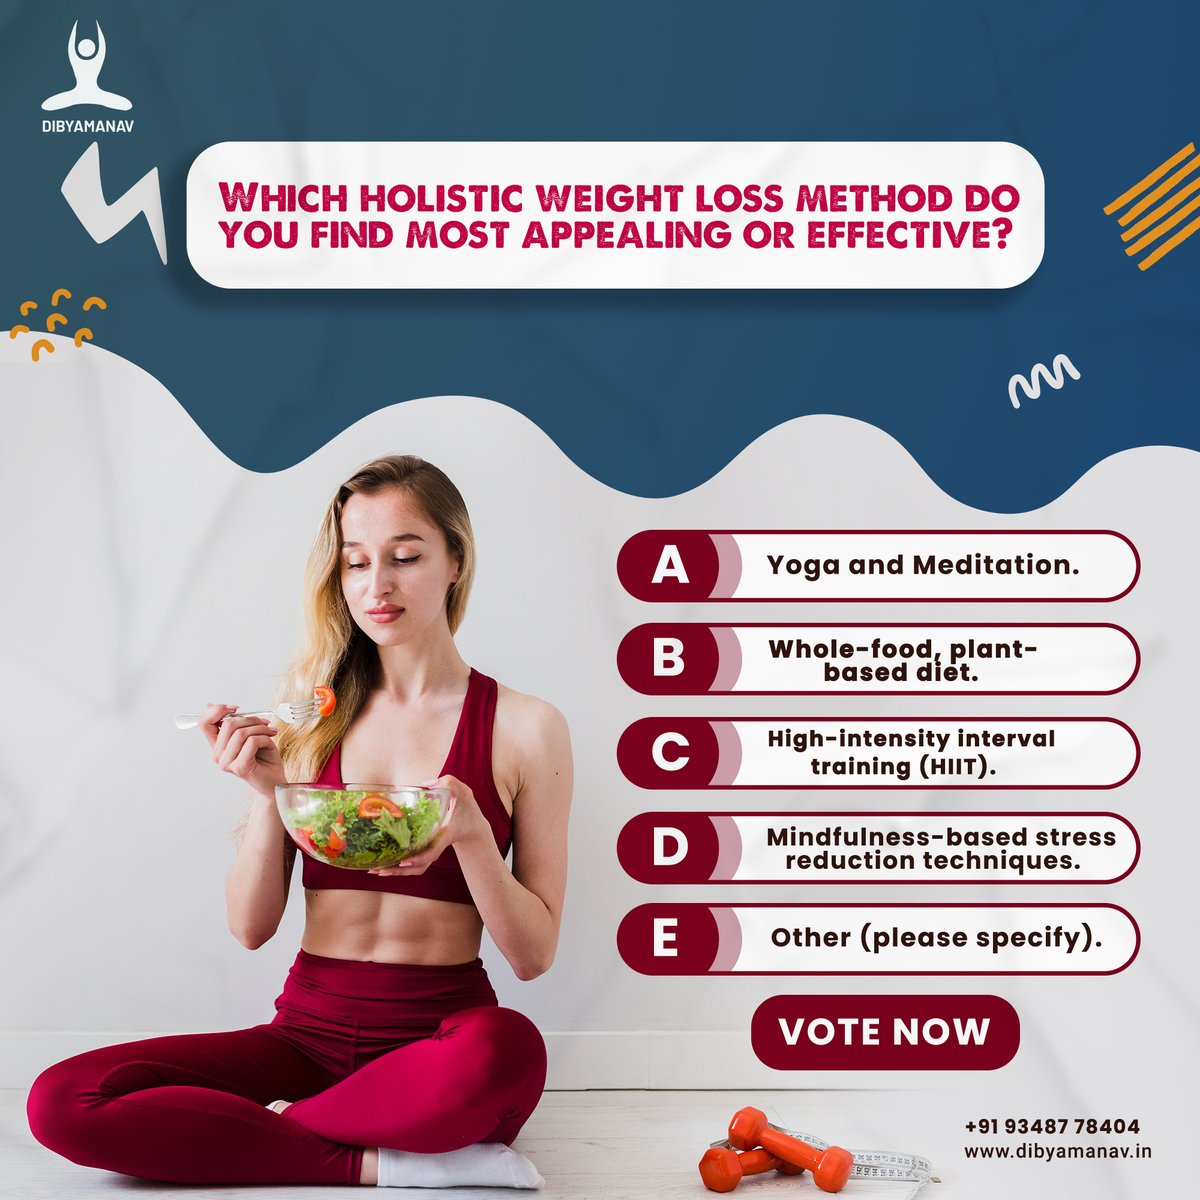 Please select the option that best represents your opinion for each question:
(This poll aims to gather insights and opinions on holistic weight loss approaches. )

#dibyamanav #holisticweightloss #weightlossjourney #dailypoll